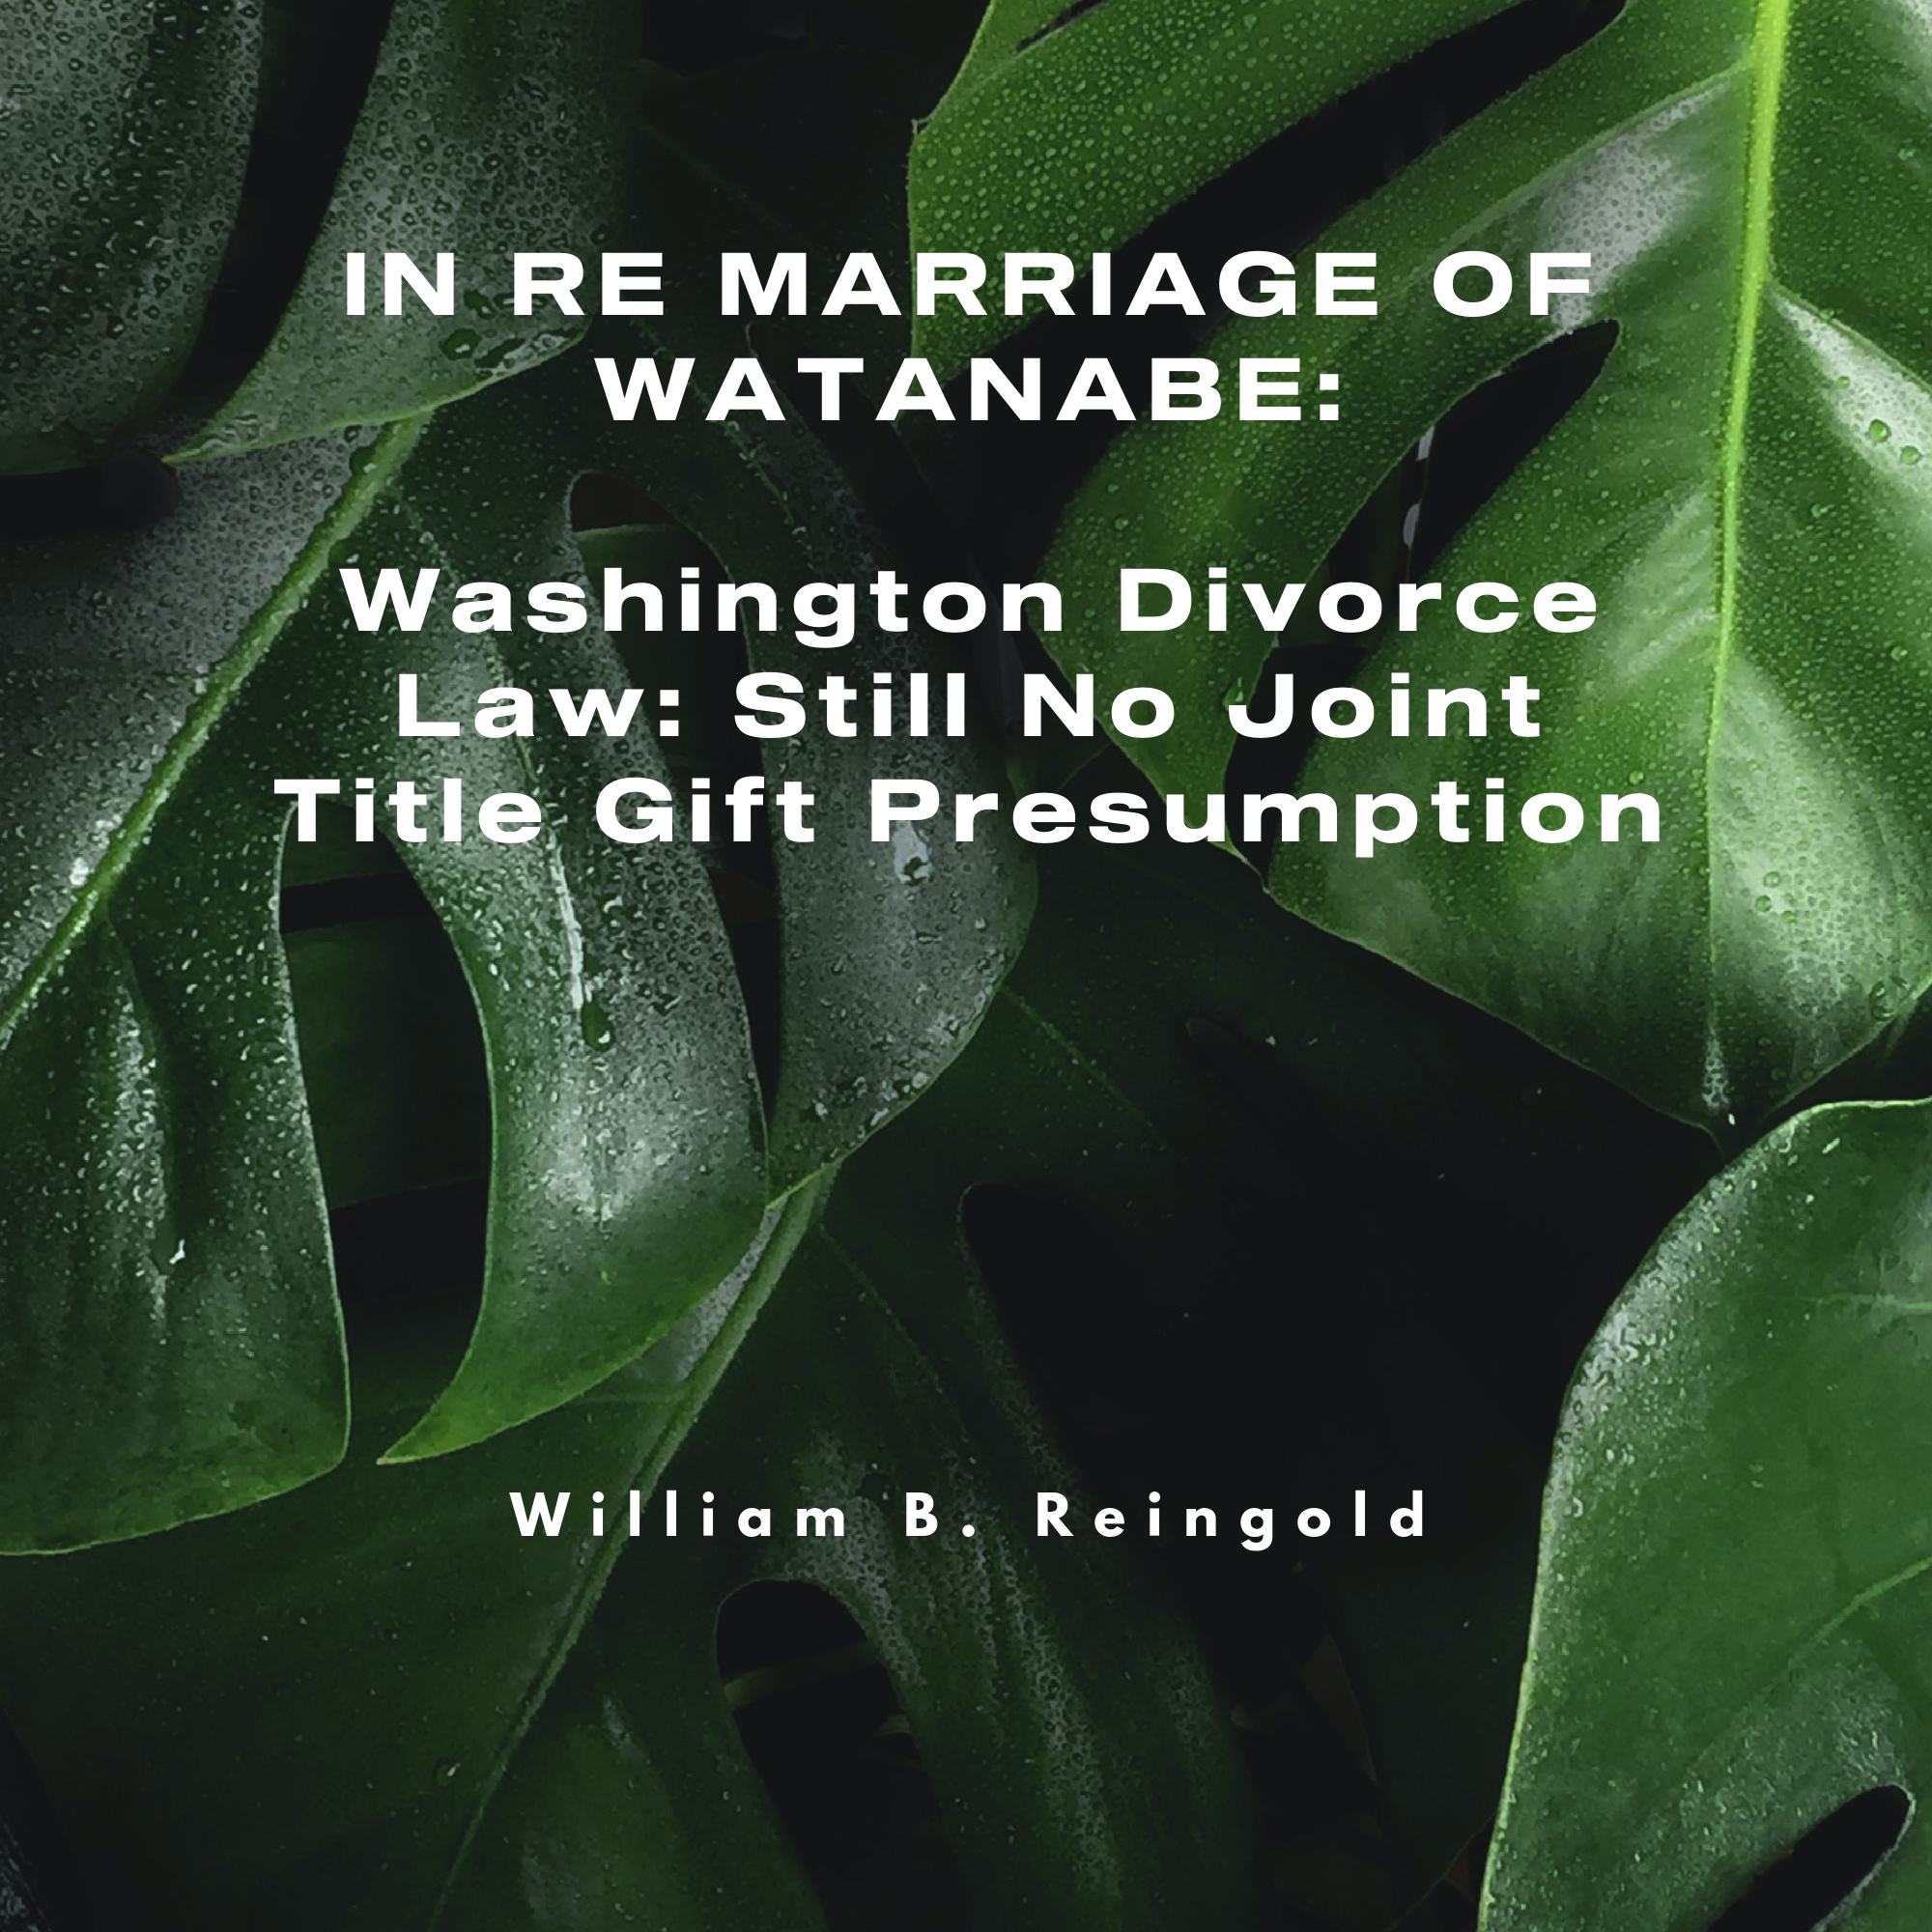 Leaves with Title of Article: Washington Divorce Law Still No Joint Title Gift Presumption